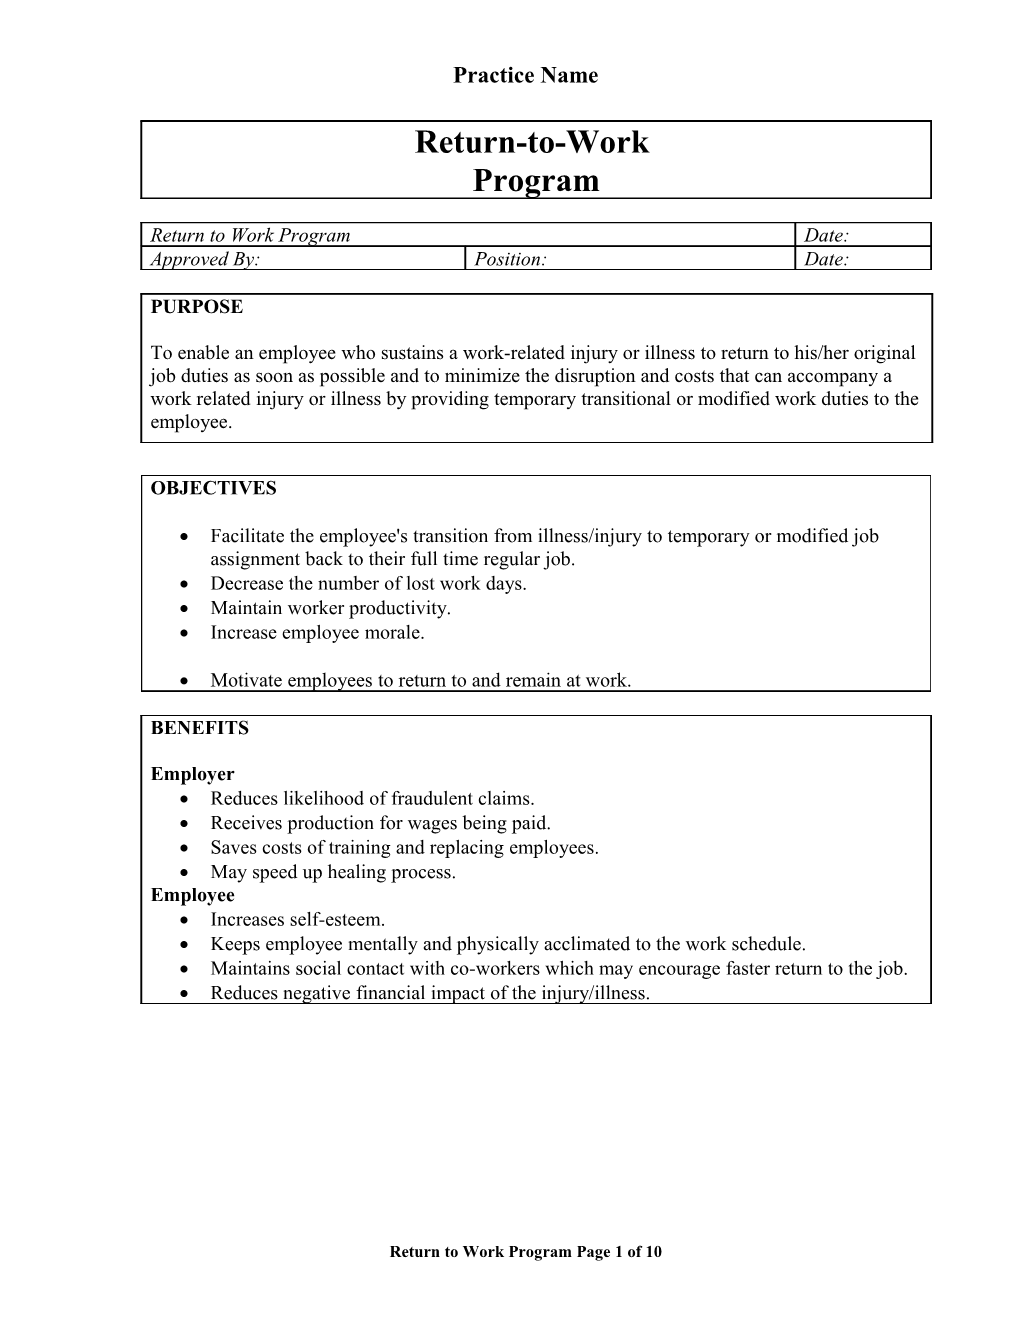 Return to Work Program Page 1 of 10